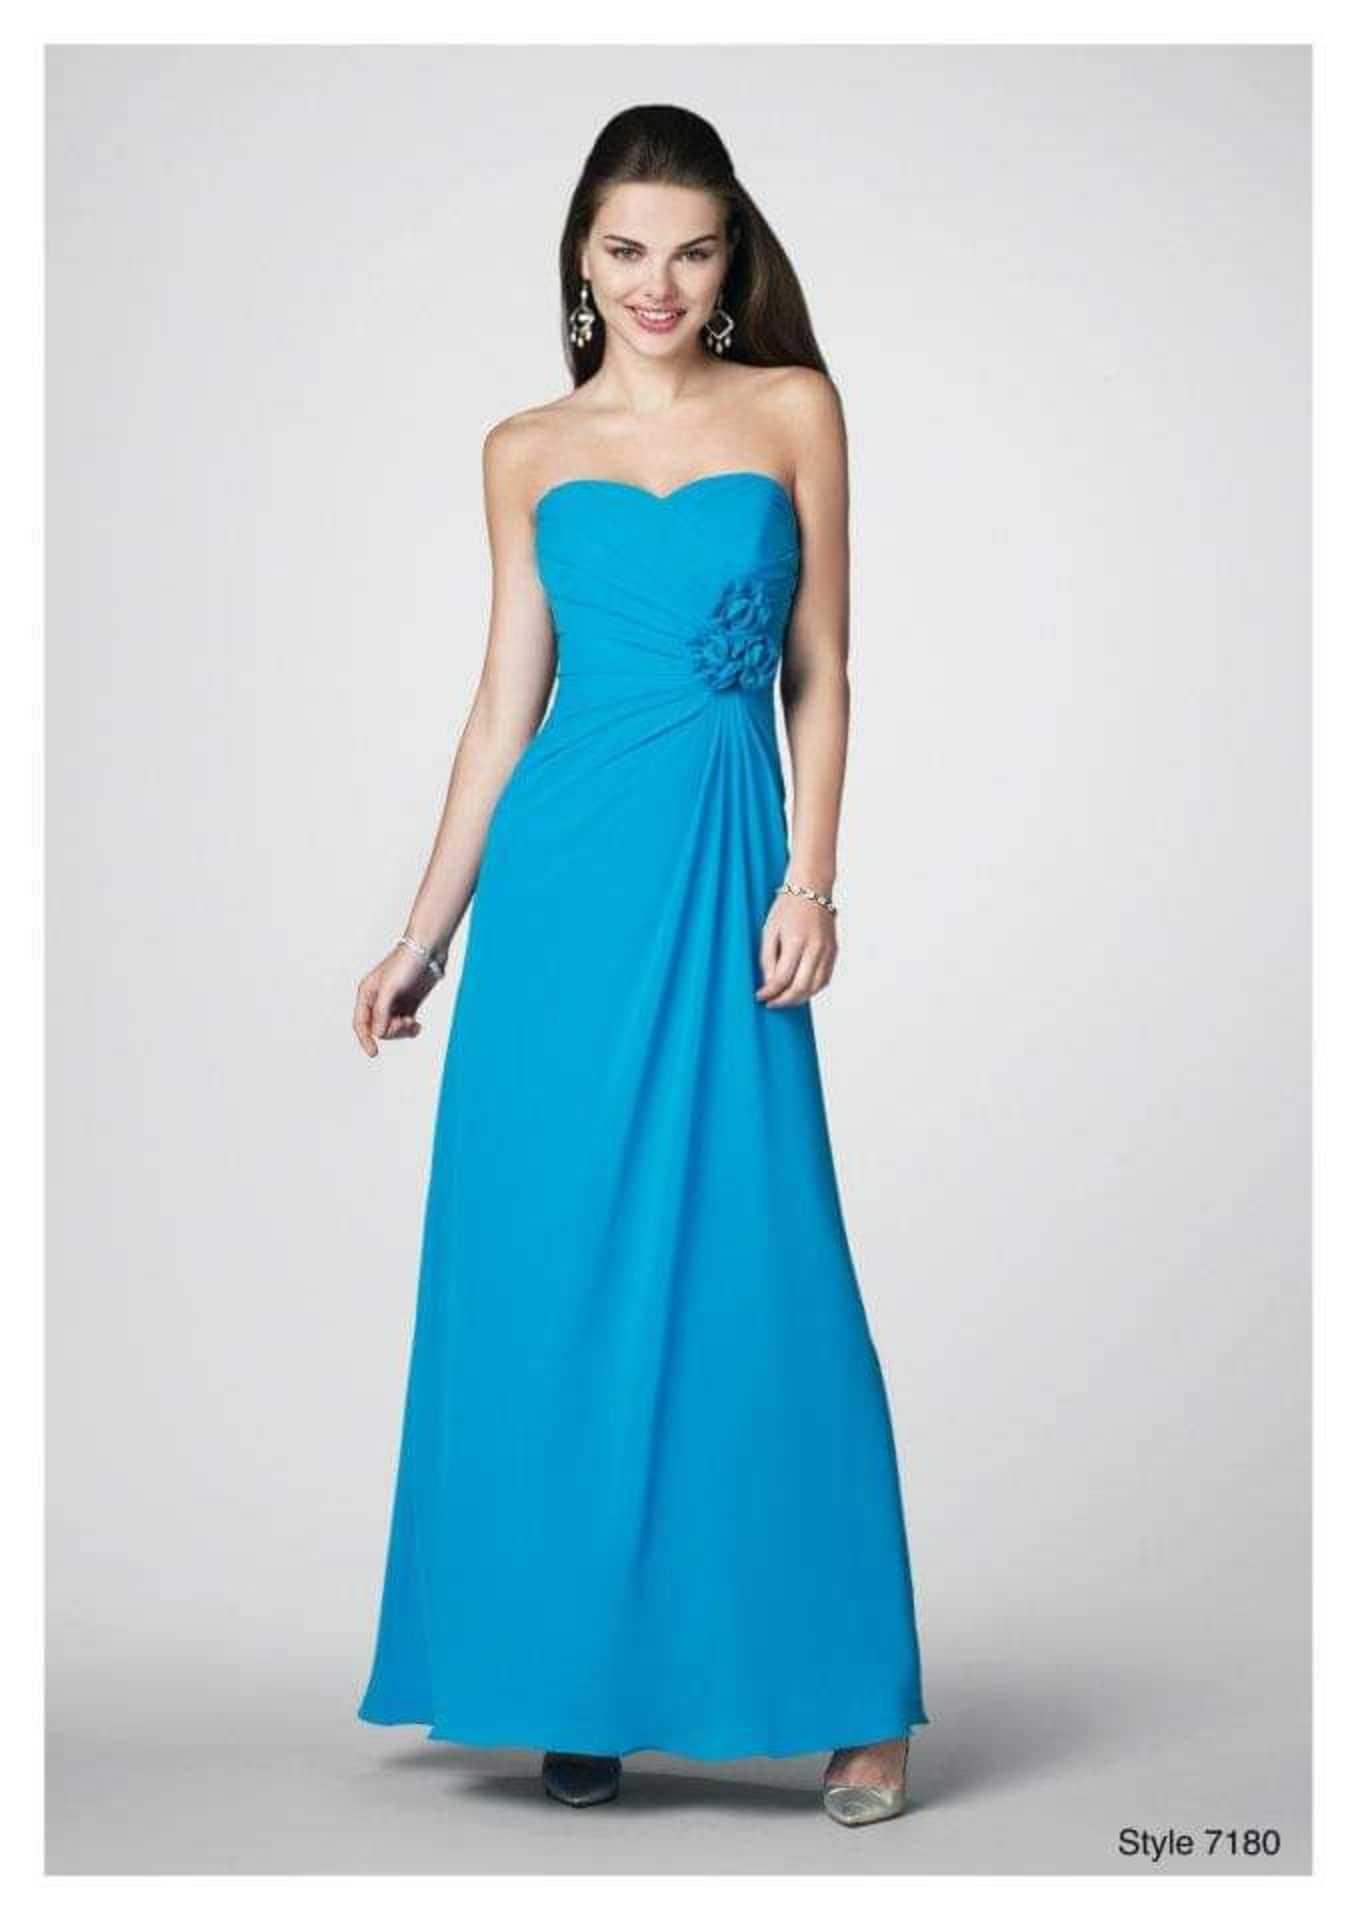 Alfred Angelo Bridesmaid Or Prom Dresses Mixed Sizes and Colours. 10 Dresses